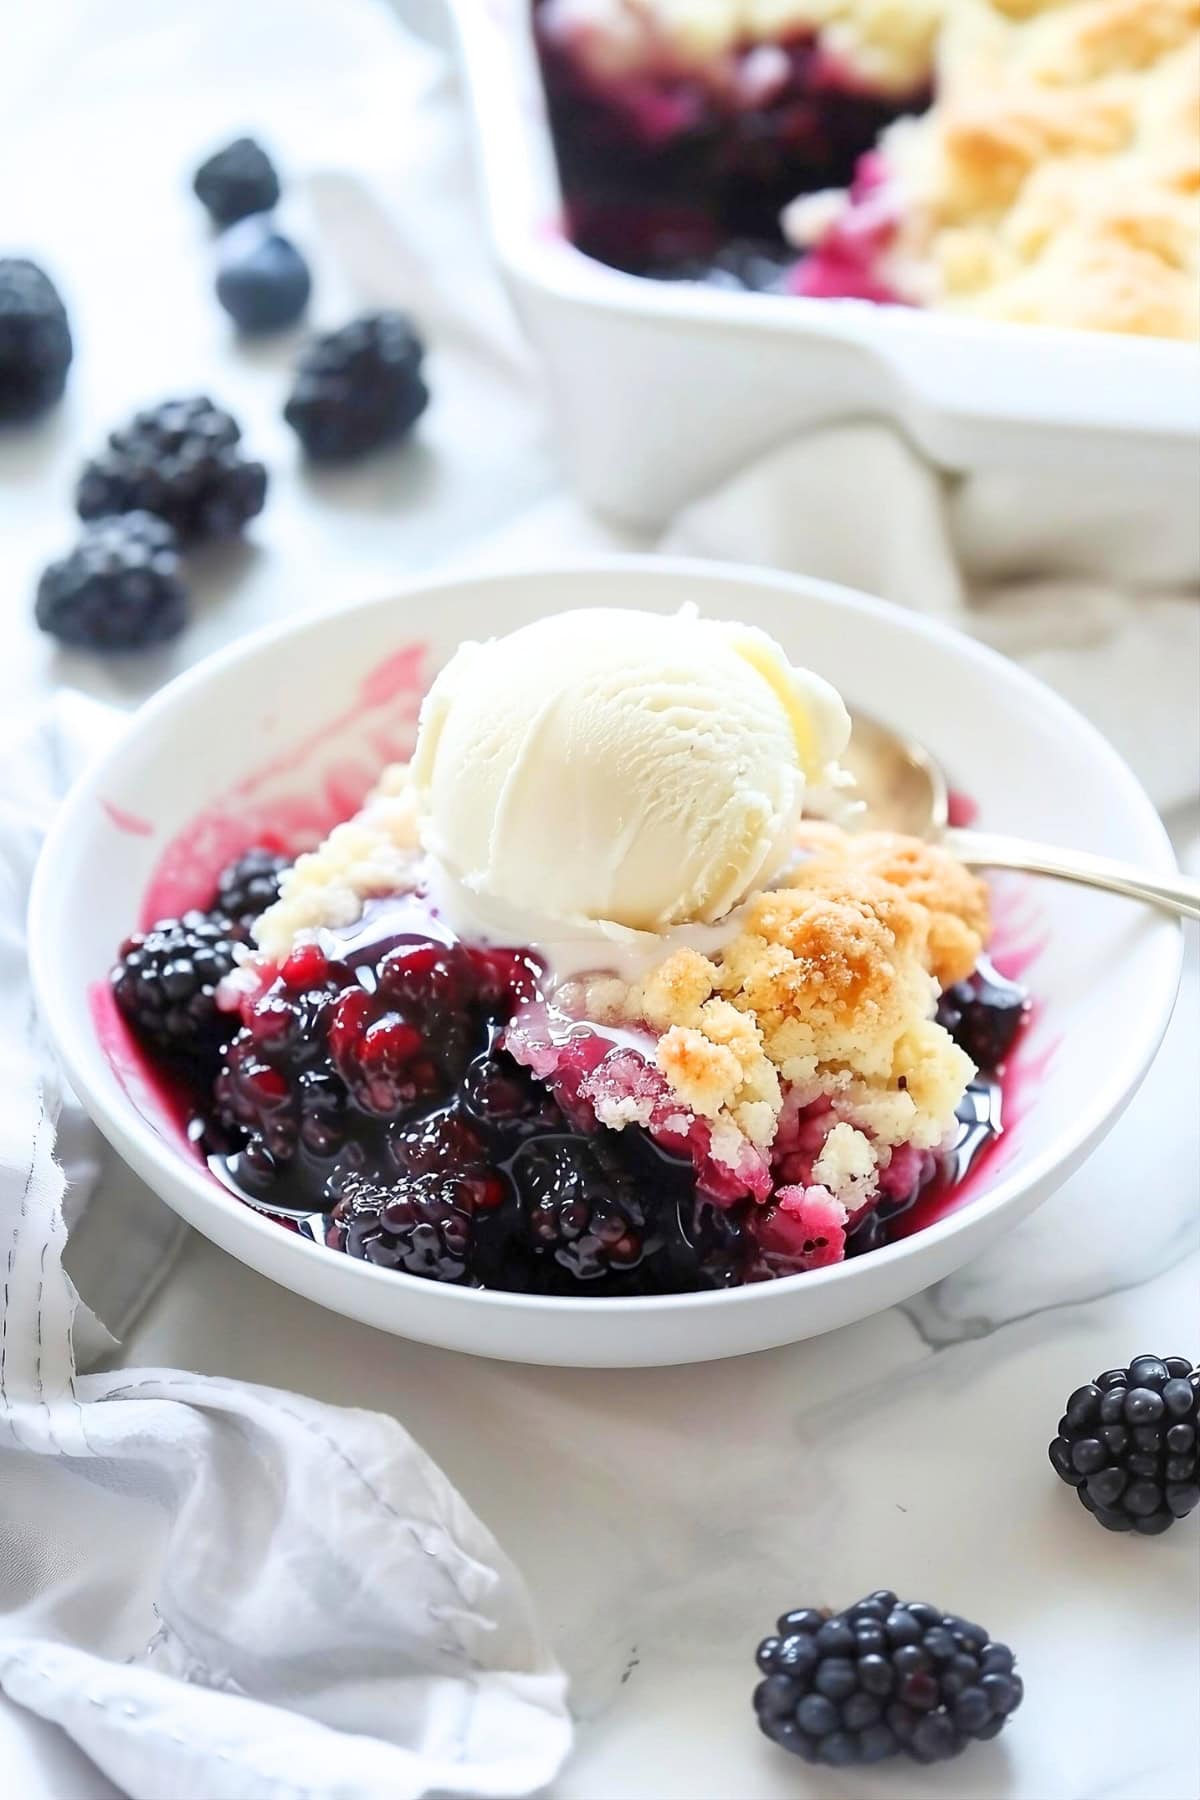 Serving of blackberry cobbler in a white bowl with a scoop of vanilla ice cream.